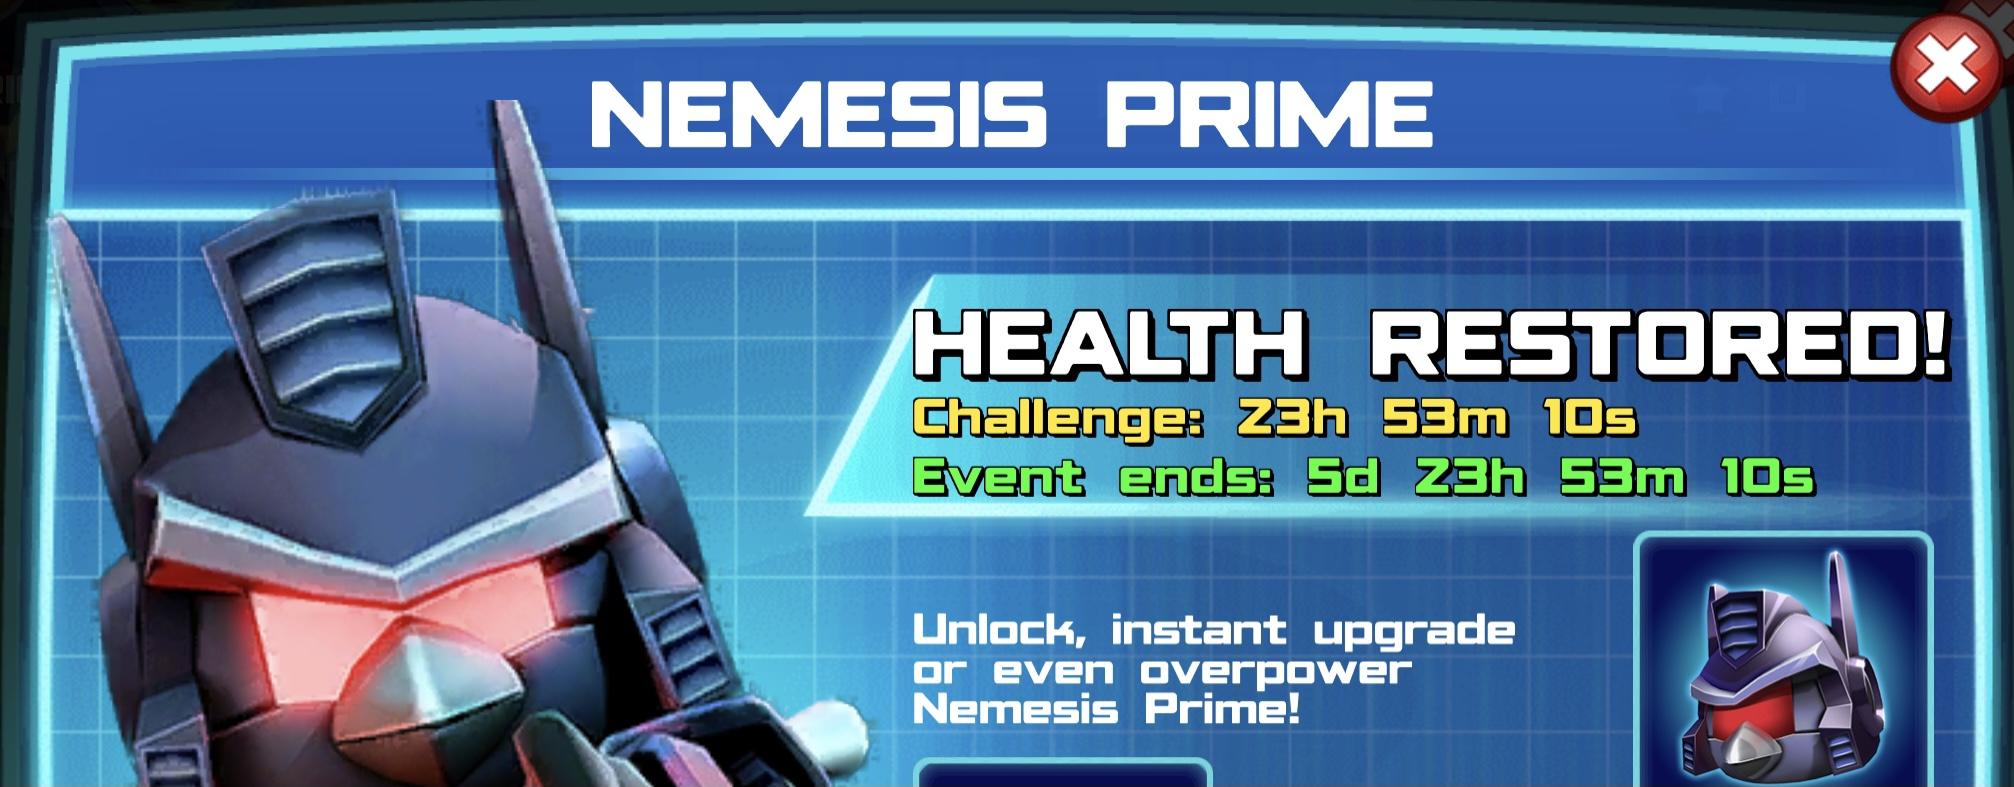 The event banner for Nemesis Prime